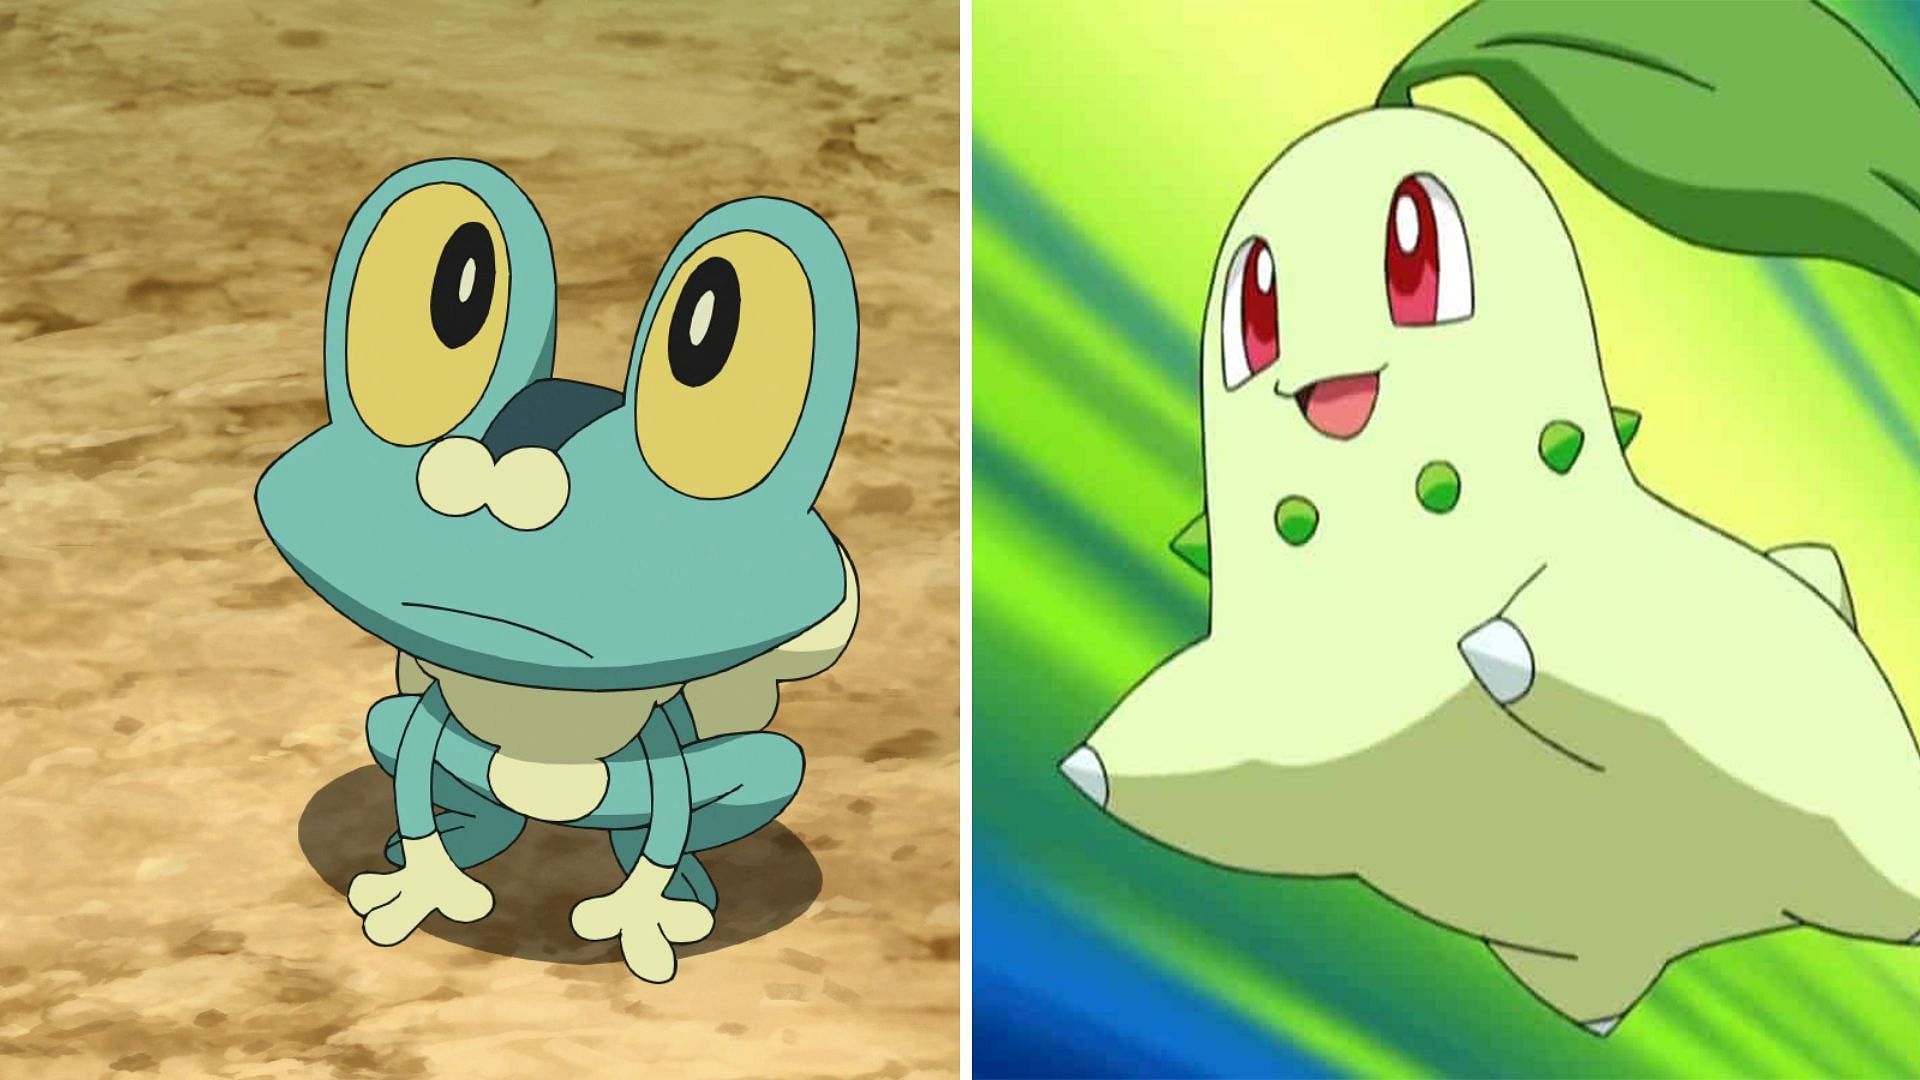 Froakie and Chikorita as two of the best starters (Image via The Pokemon Company)